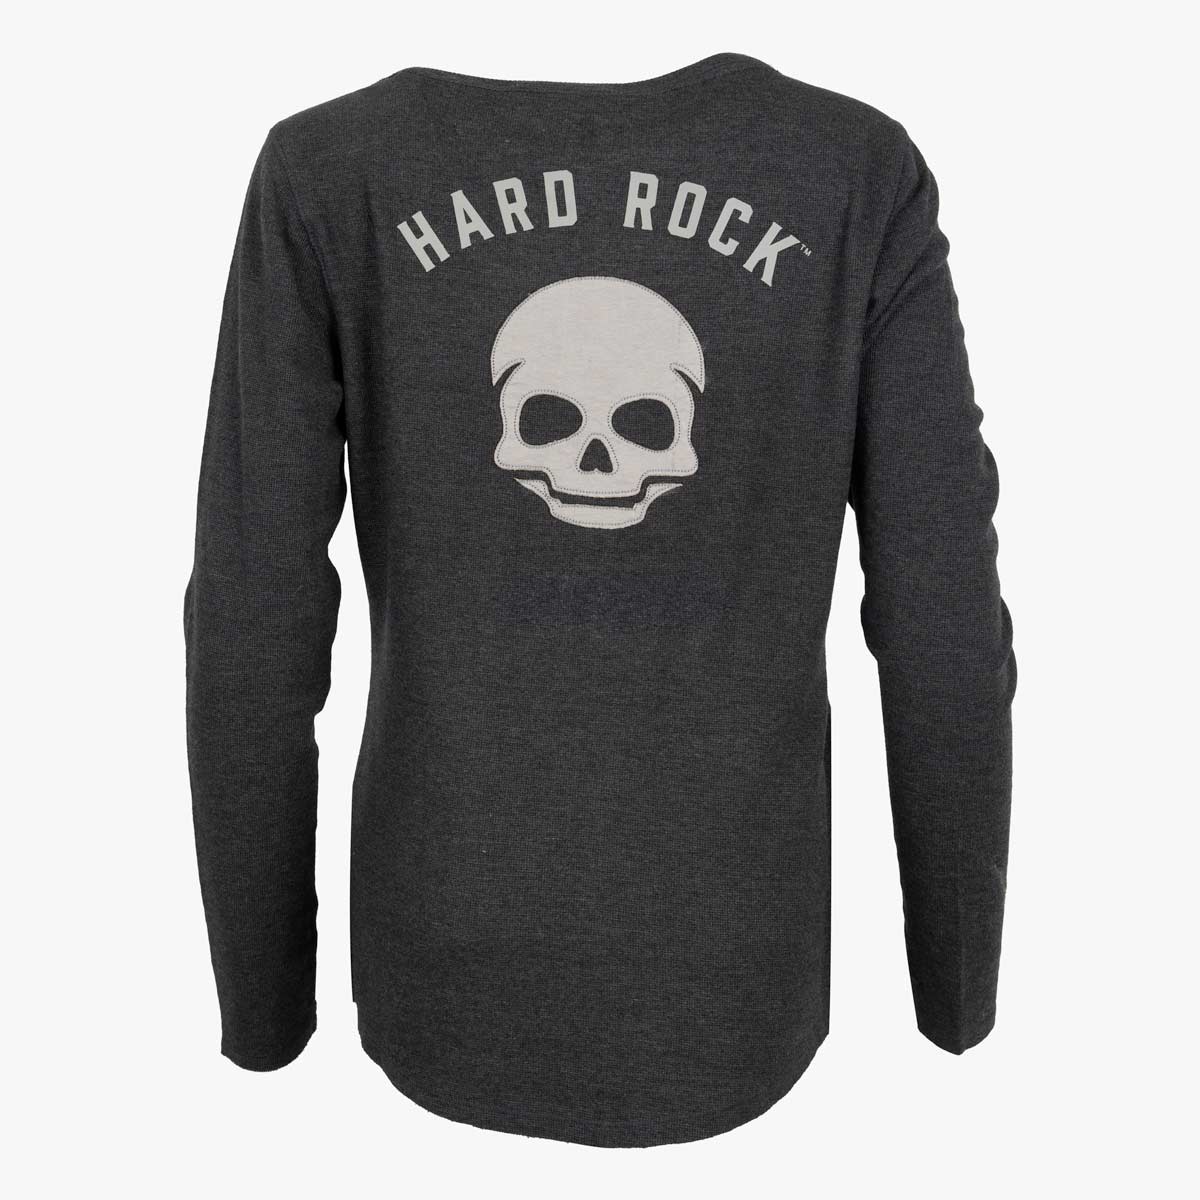 Guitar Company Lace Up Skull Thermal in Black with Skull Design image number 1